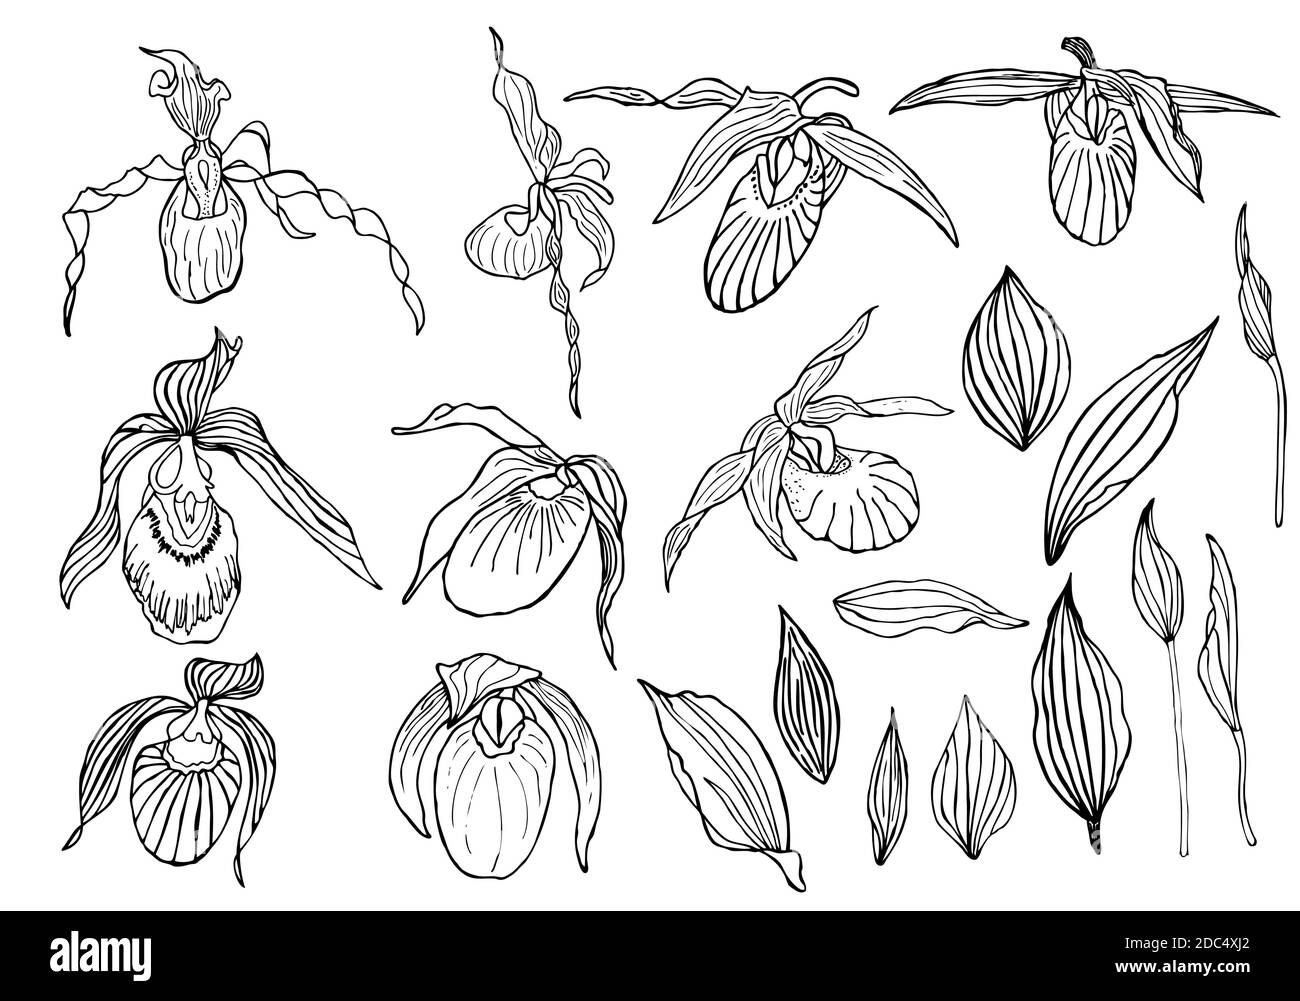 Hand drawn set of orchid flowers and floral elements. Isolated on white. Black and white vector illustration. Stock Vector